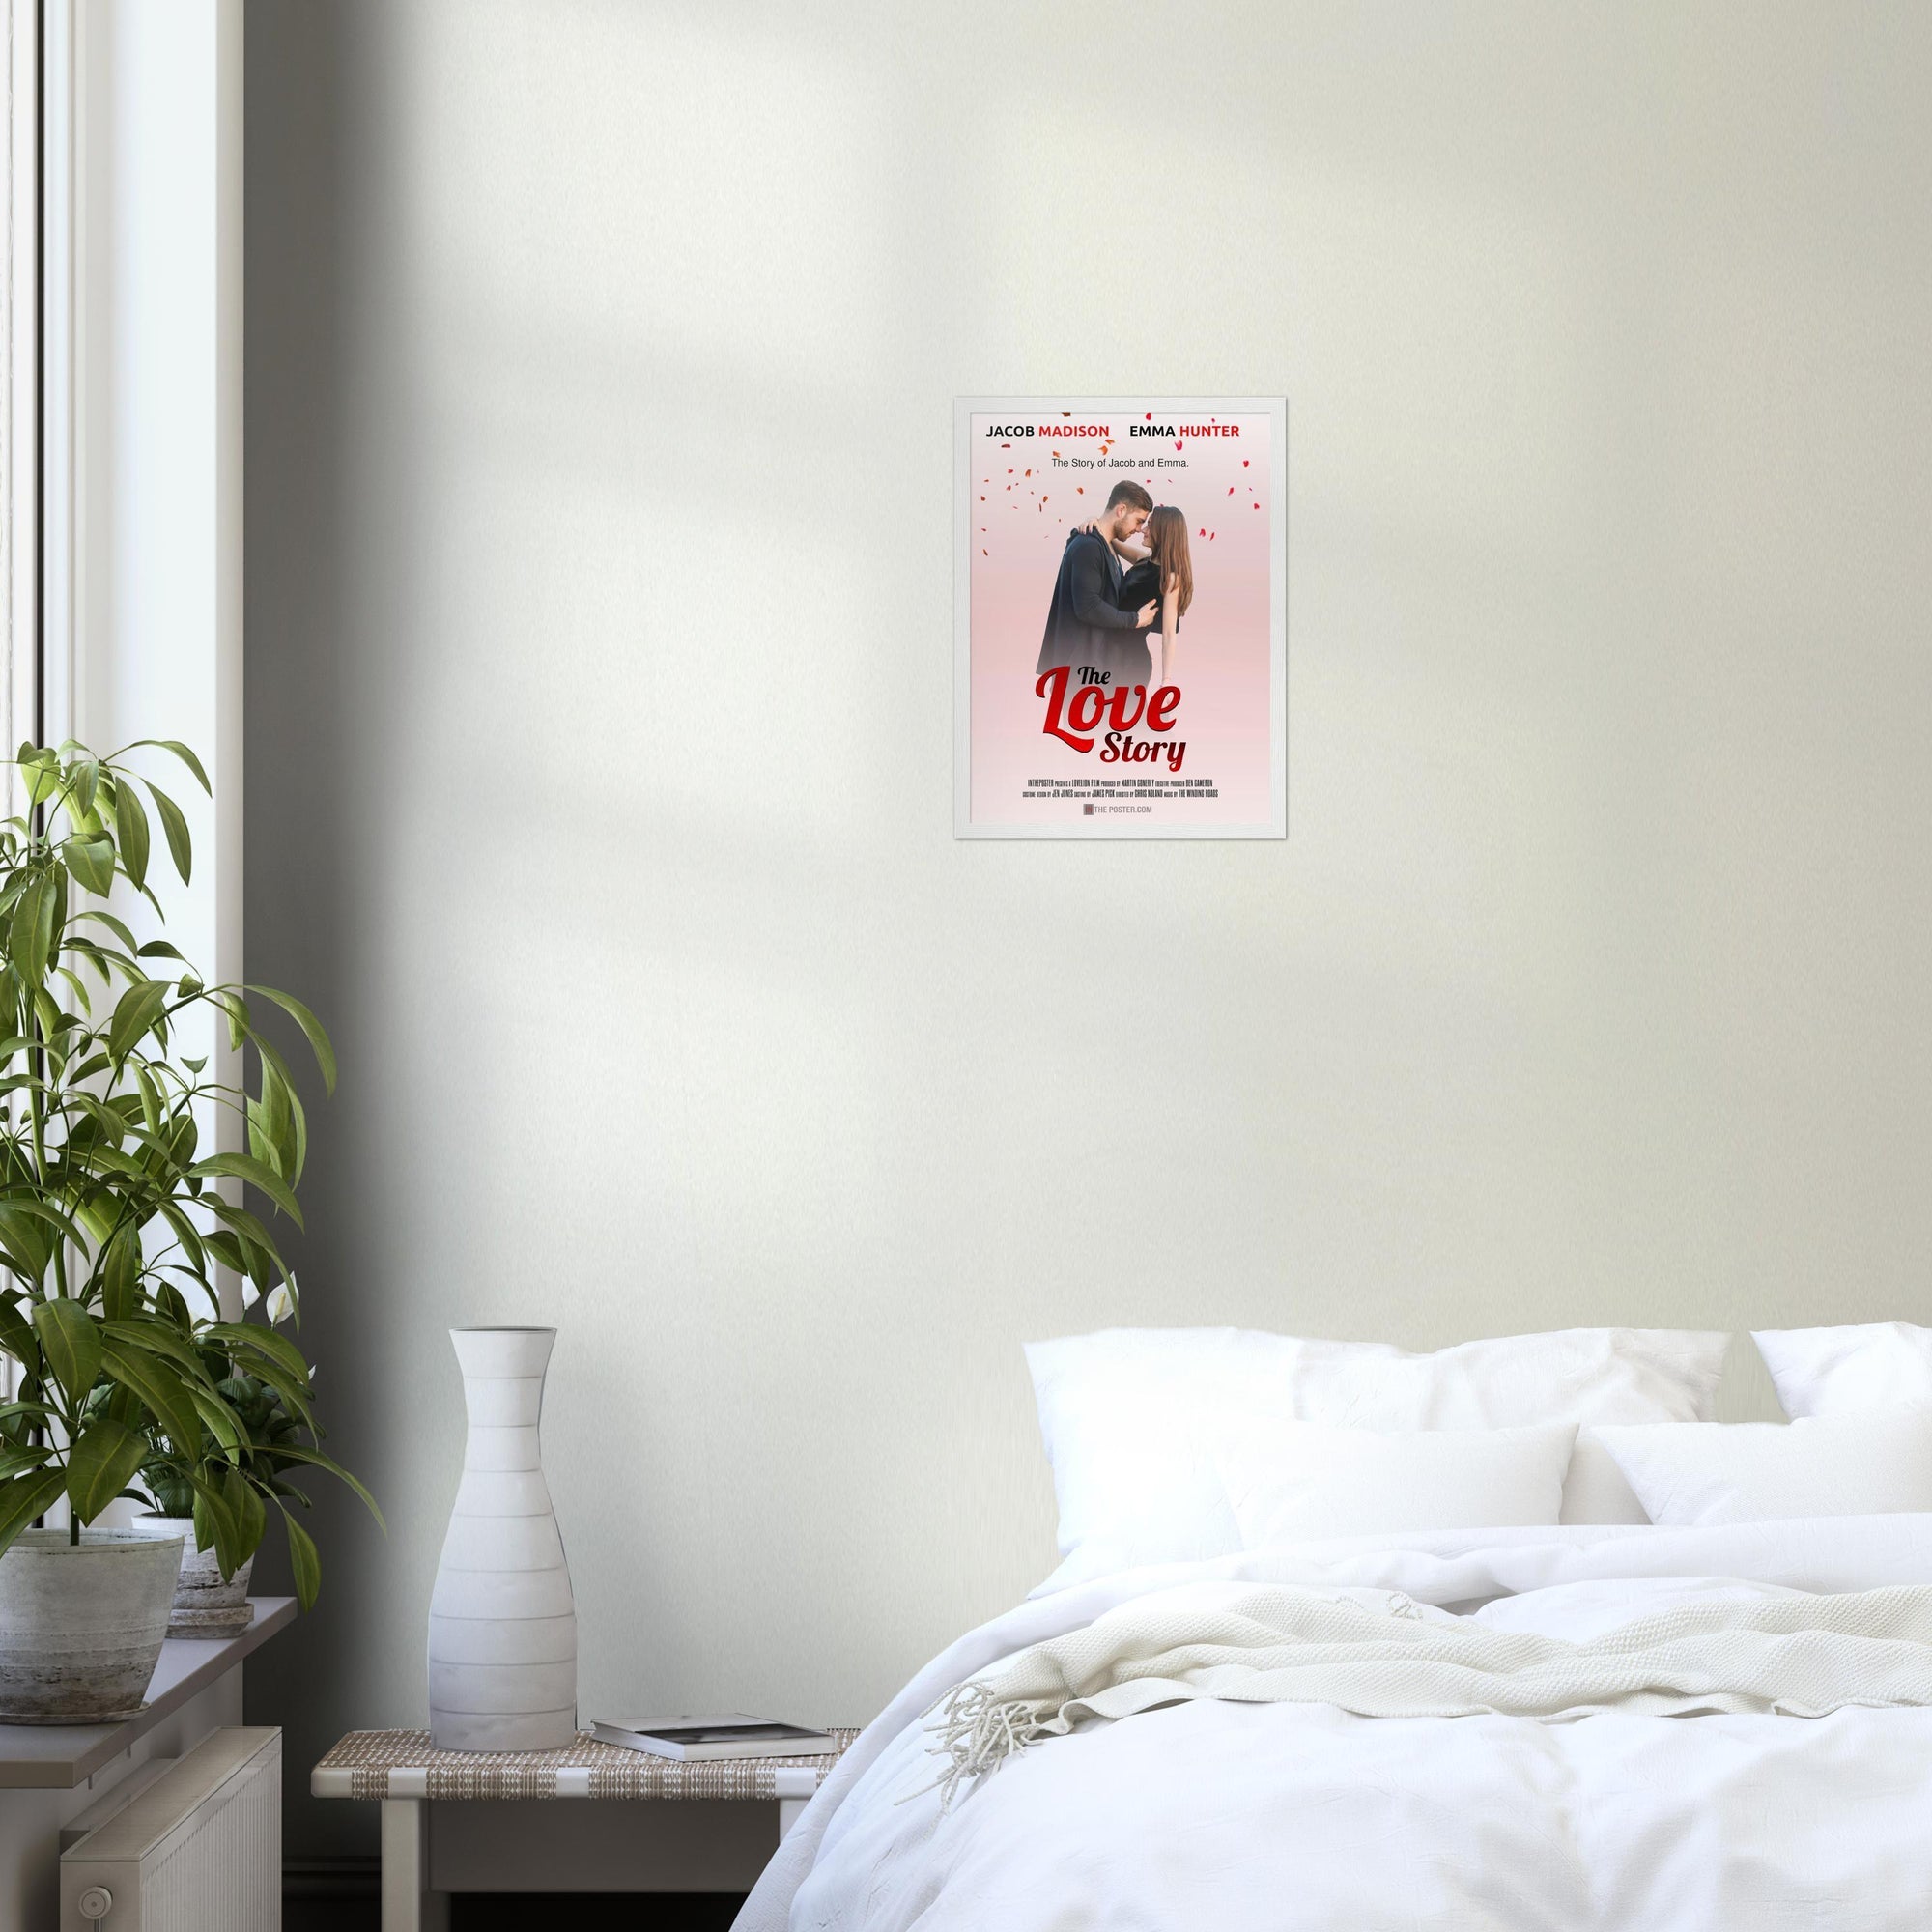 A bedroom wall with a small white frame with a film poster called The Love Story